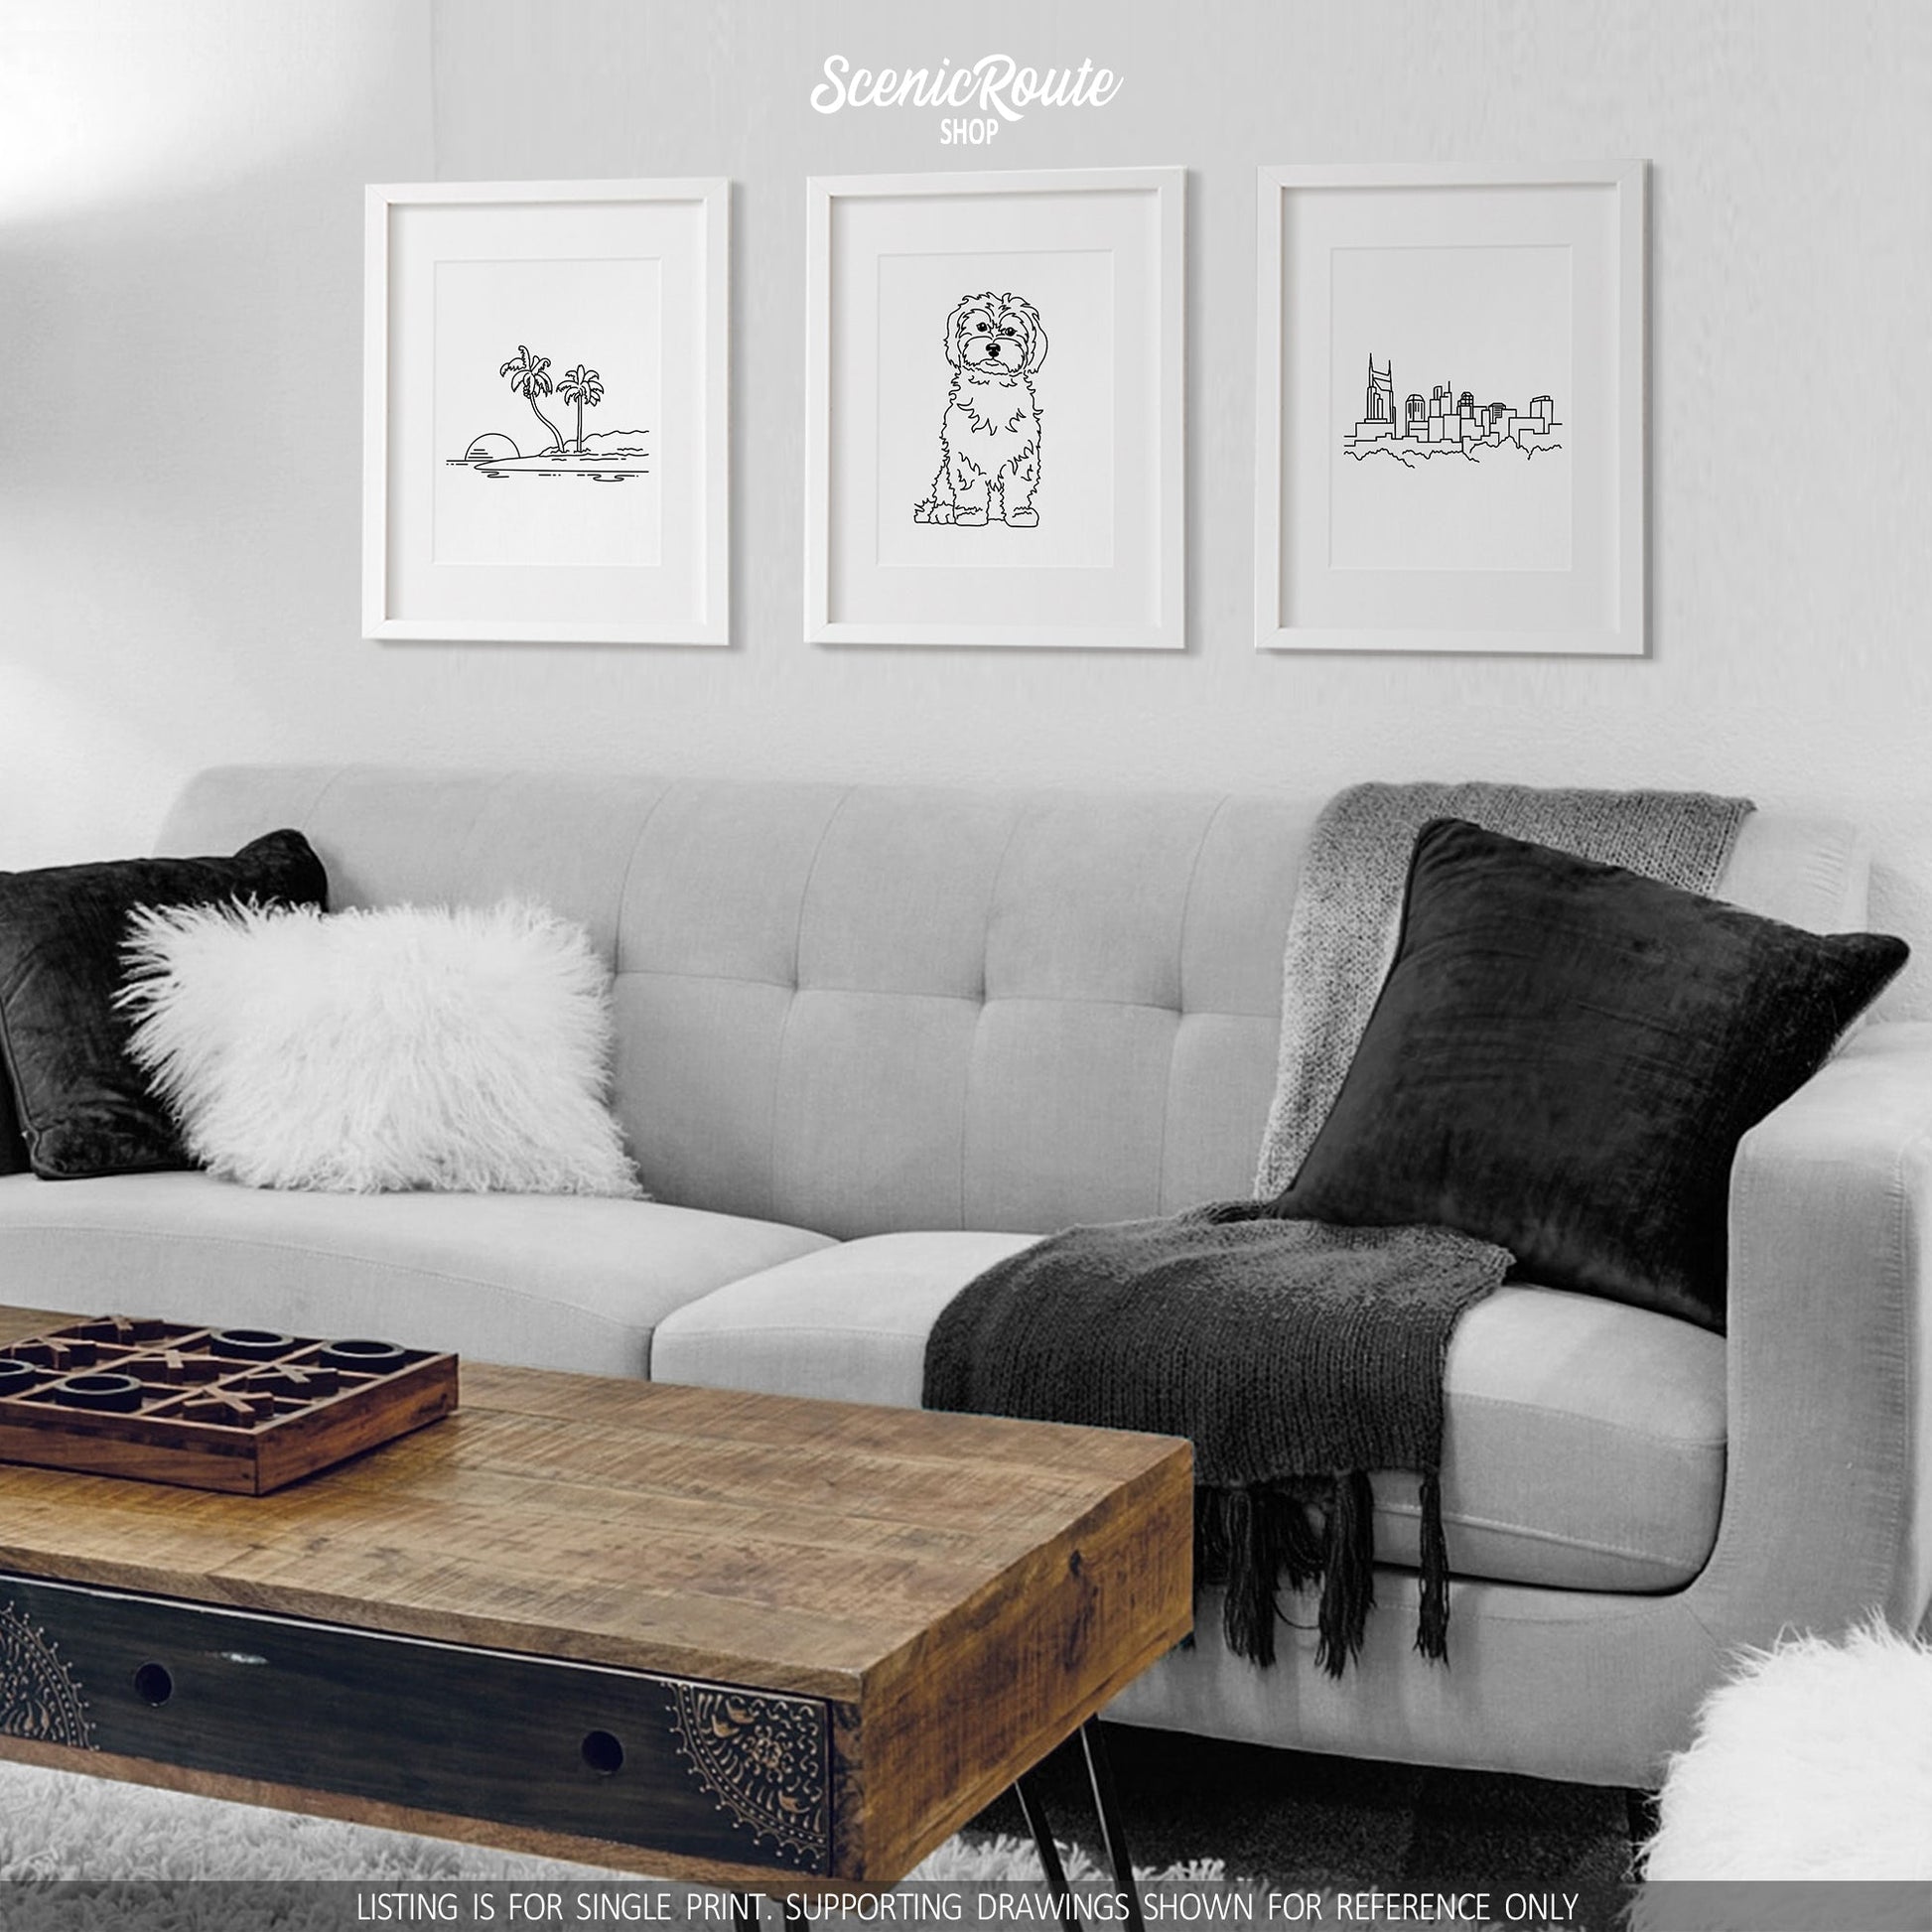 A group of three framed drawings on a white wall hanging above a couch with pillows and a blanket. The line art drawings include an Island, a Maltese dog, and the Nashville Skyline